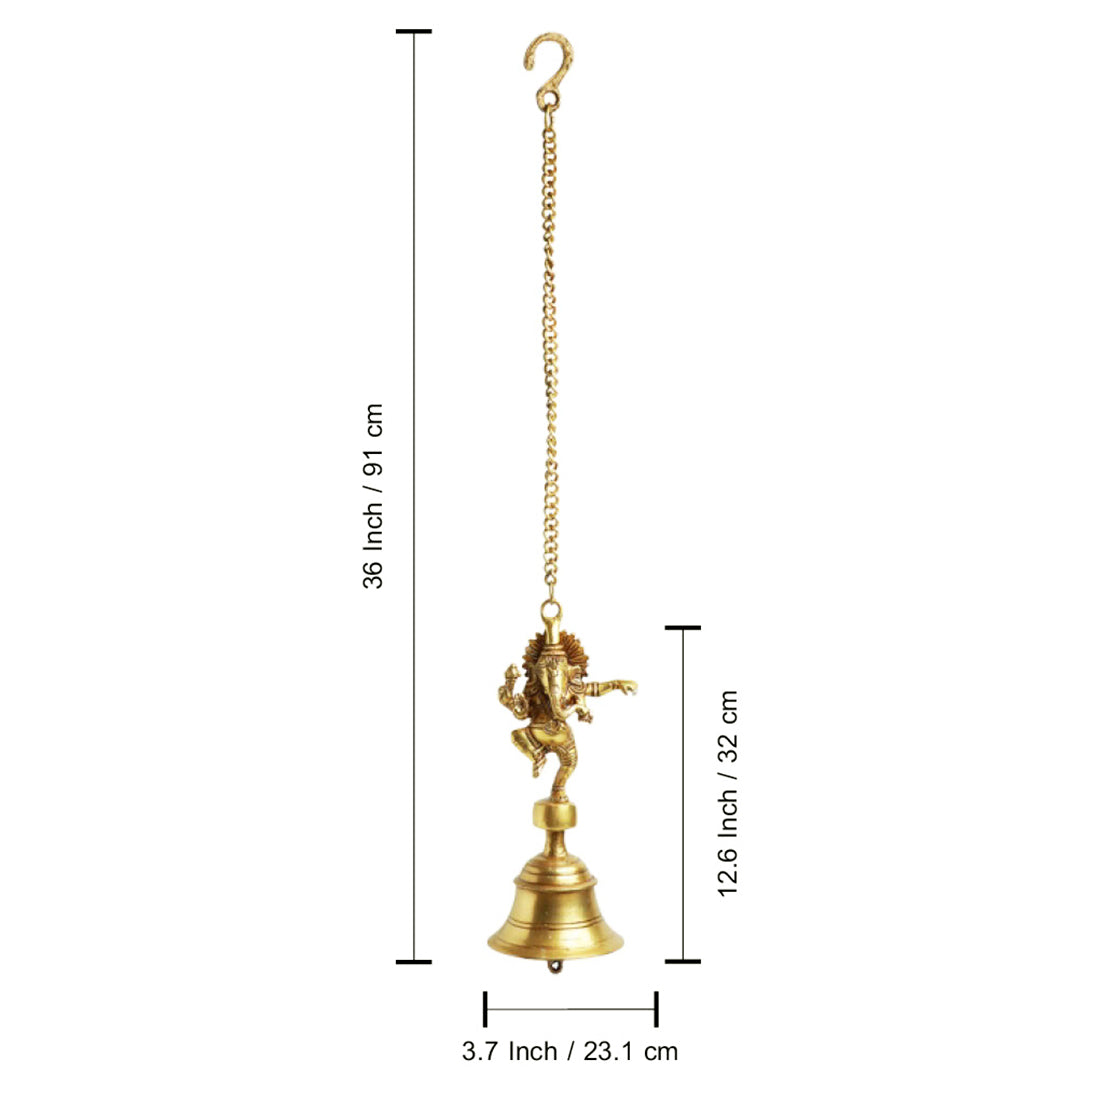 'Dancing Ganpati' Hand-Etched Decorative Hanging Bell In Brass